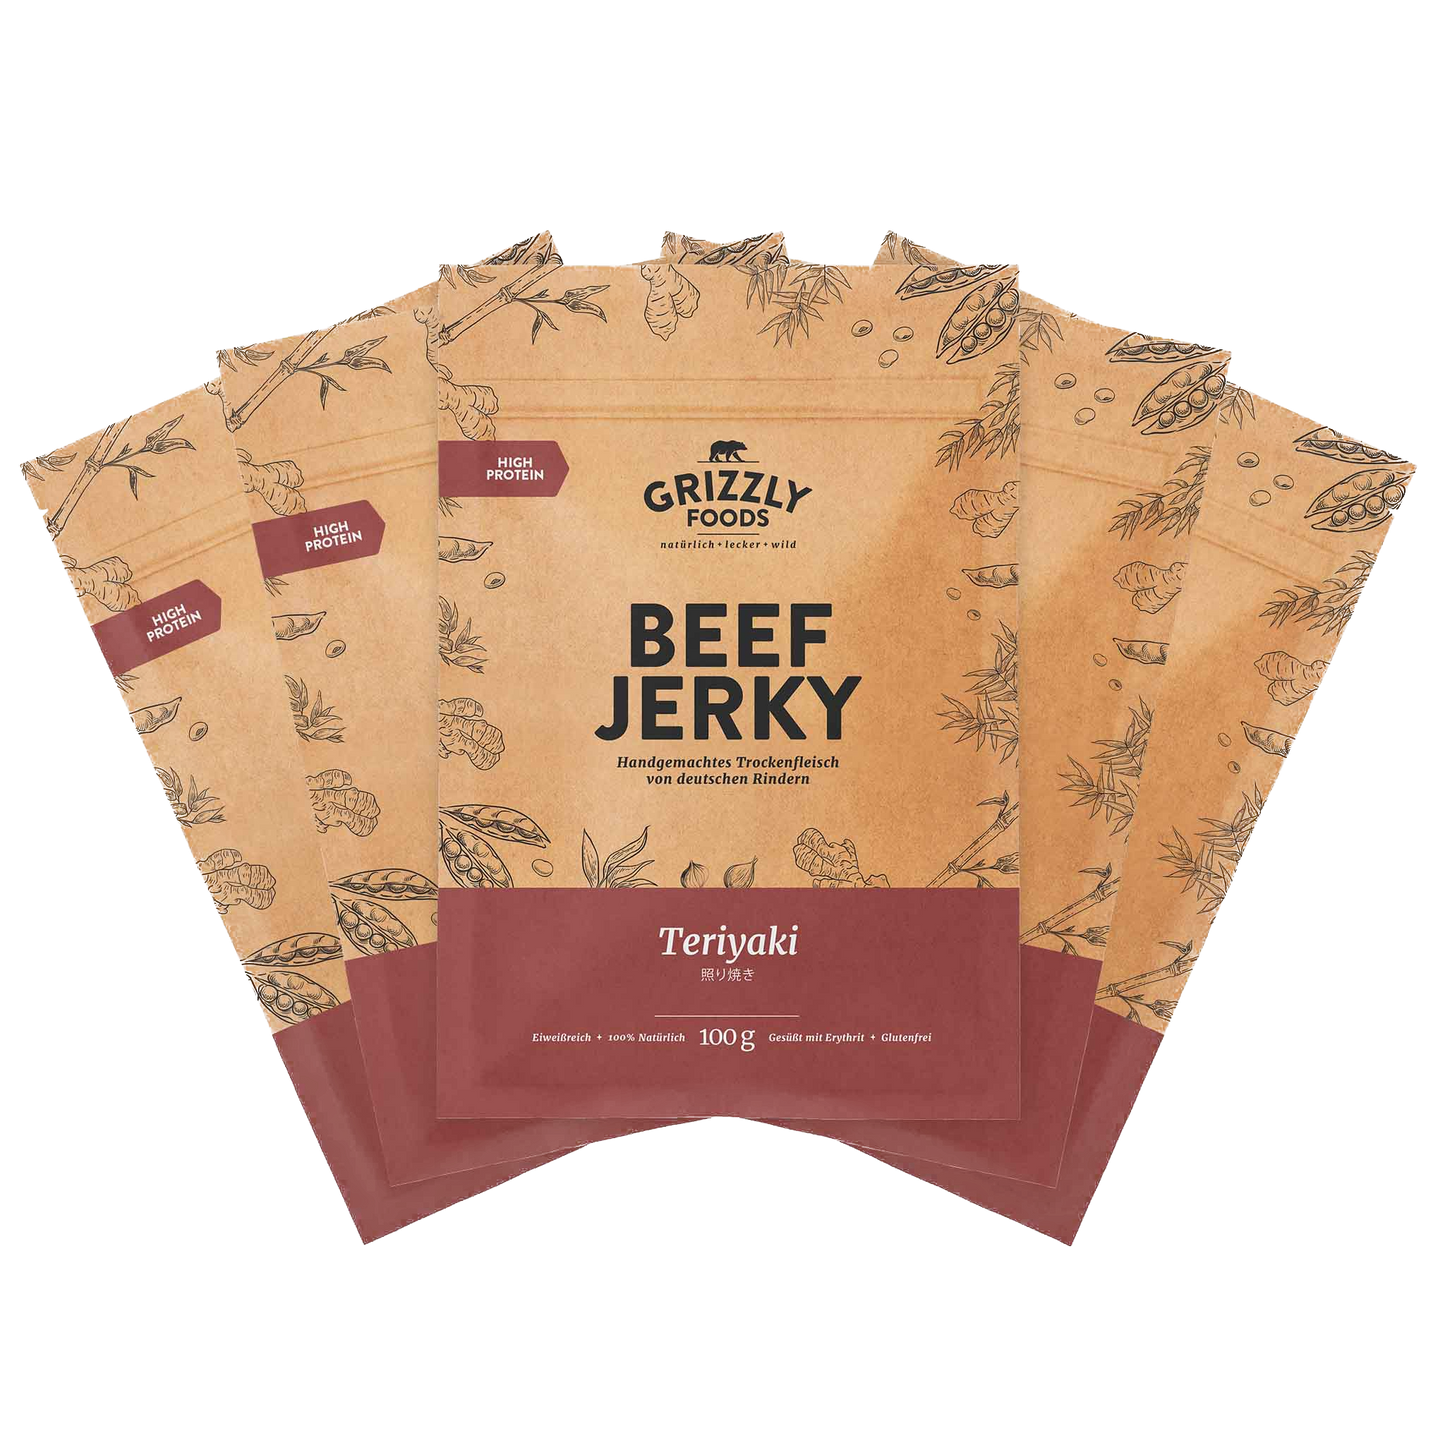 Grizzly Foods » Beef Jerky » 5x Sets